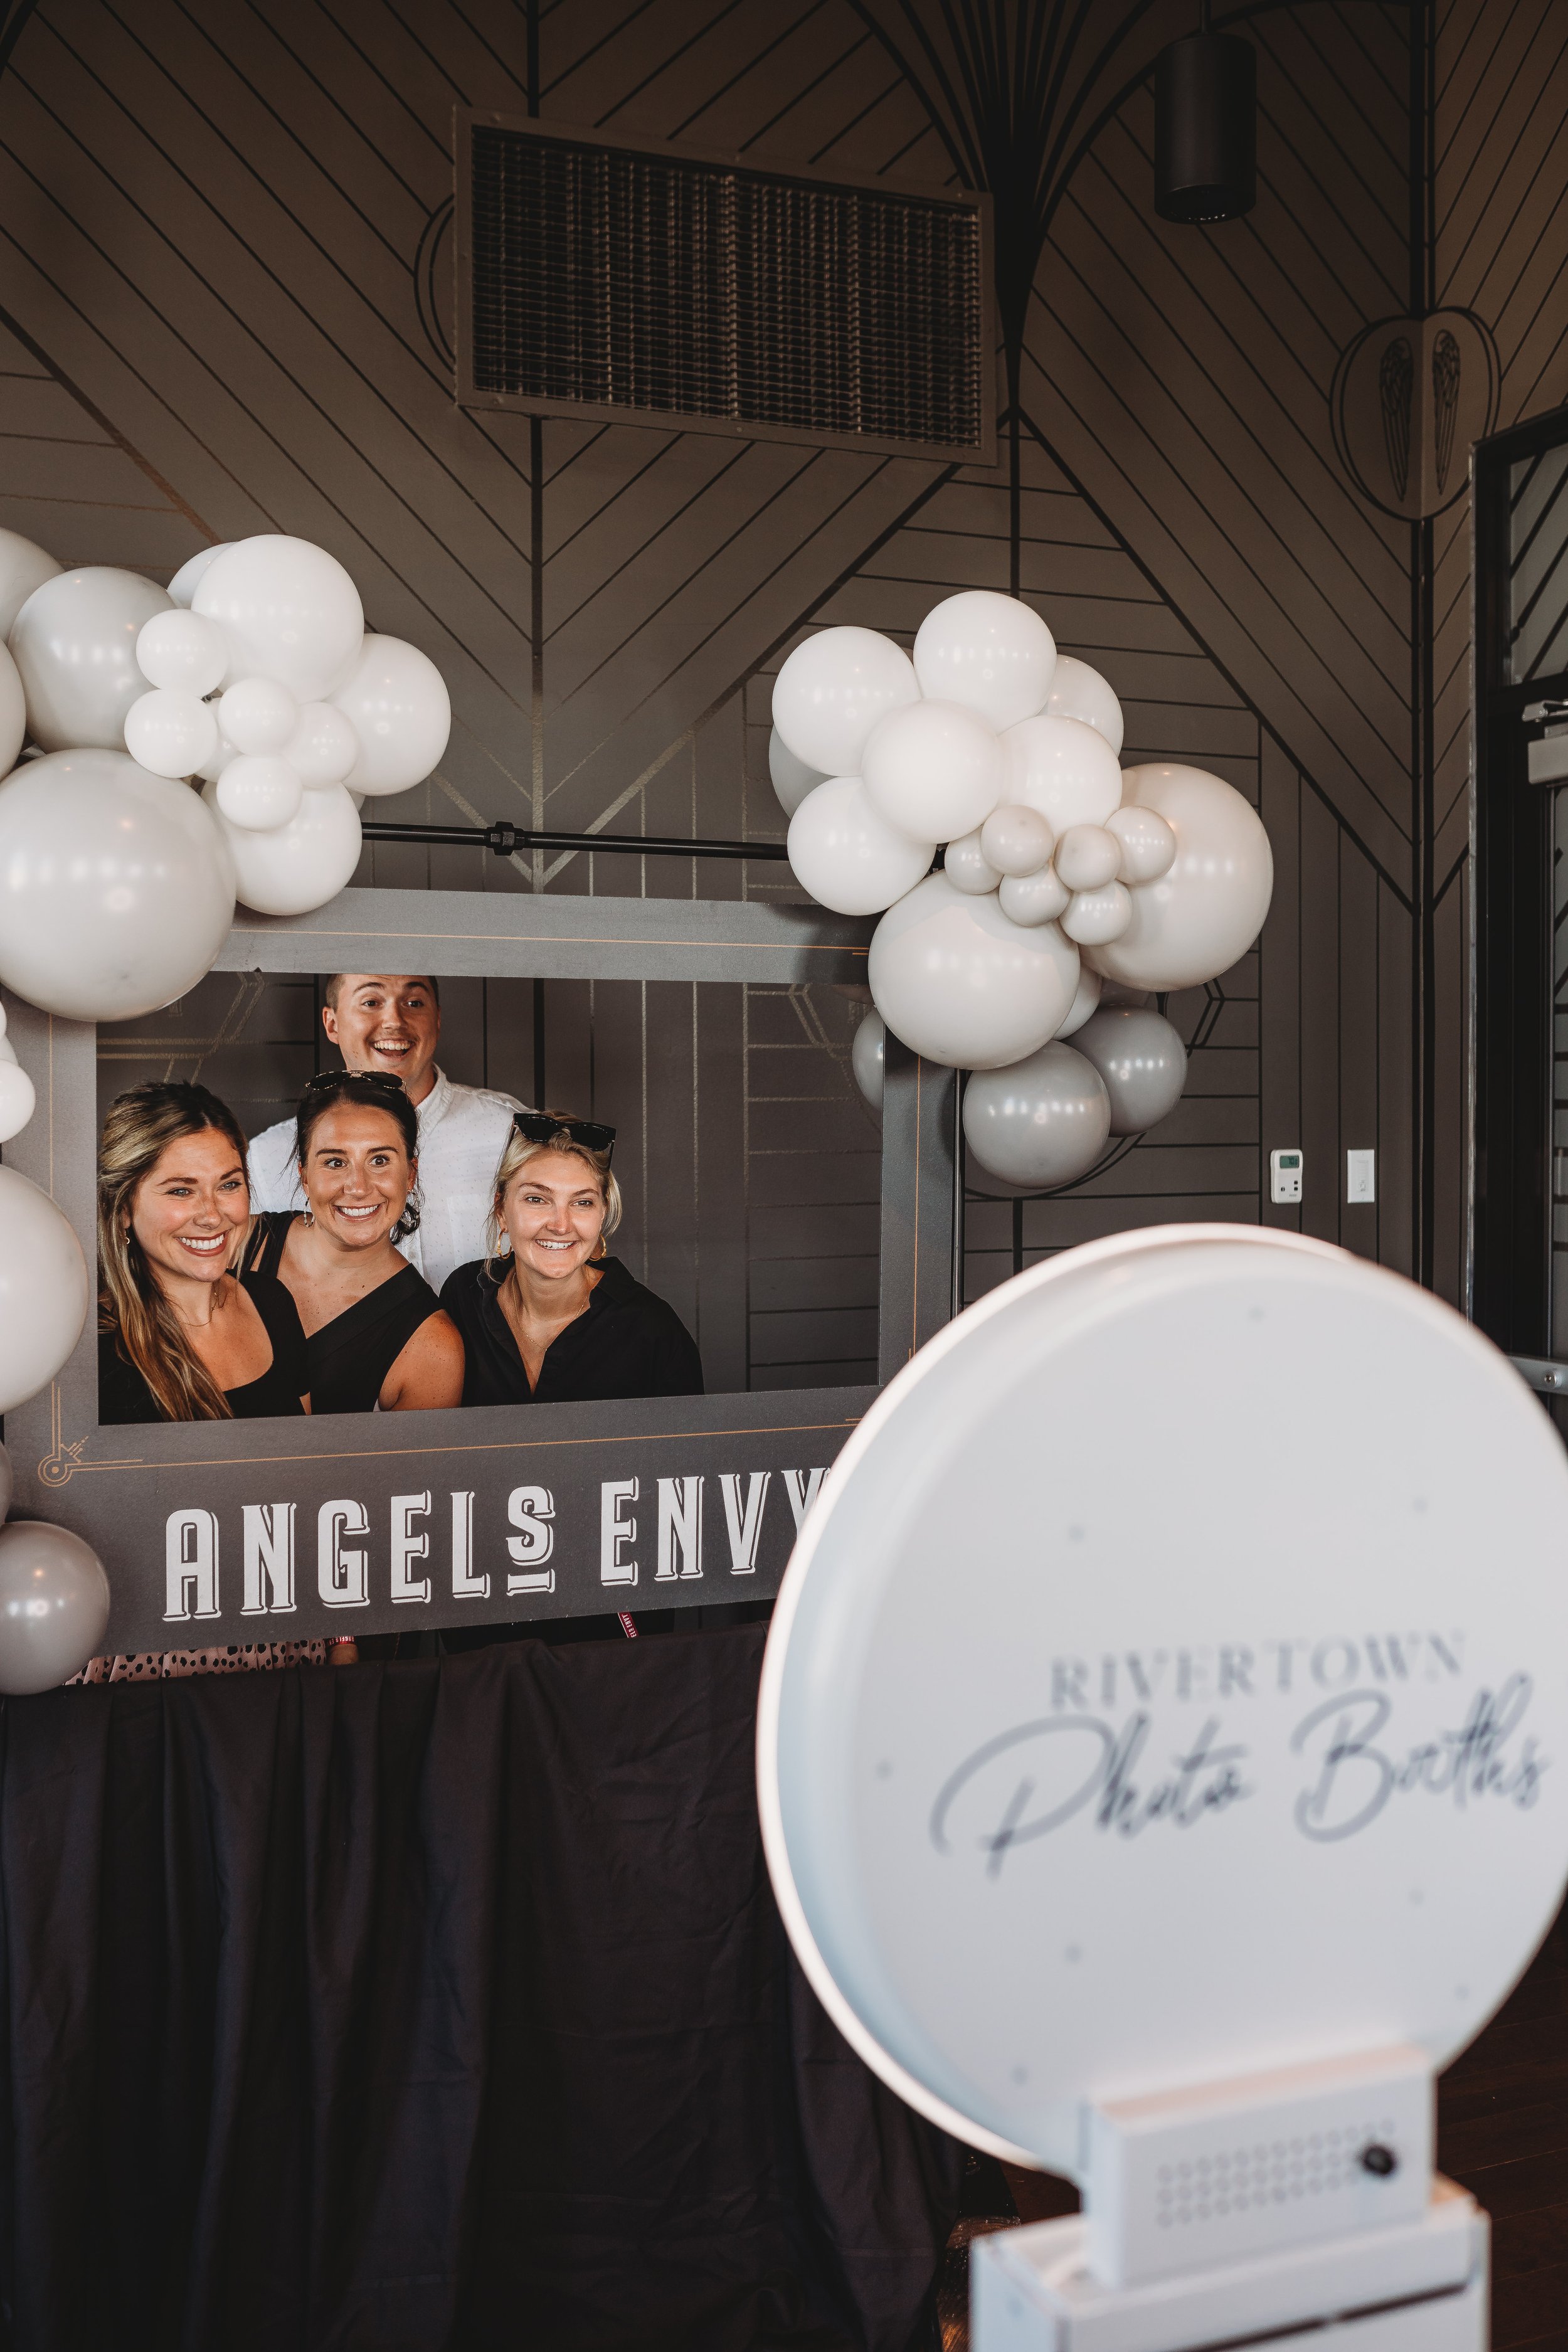 Rivertown Photo Booths - Angel's Envy Expansion Party - Event Photos by Hannah Shelton Photography-14.jpg